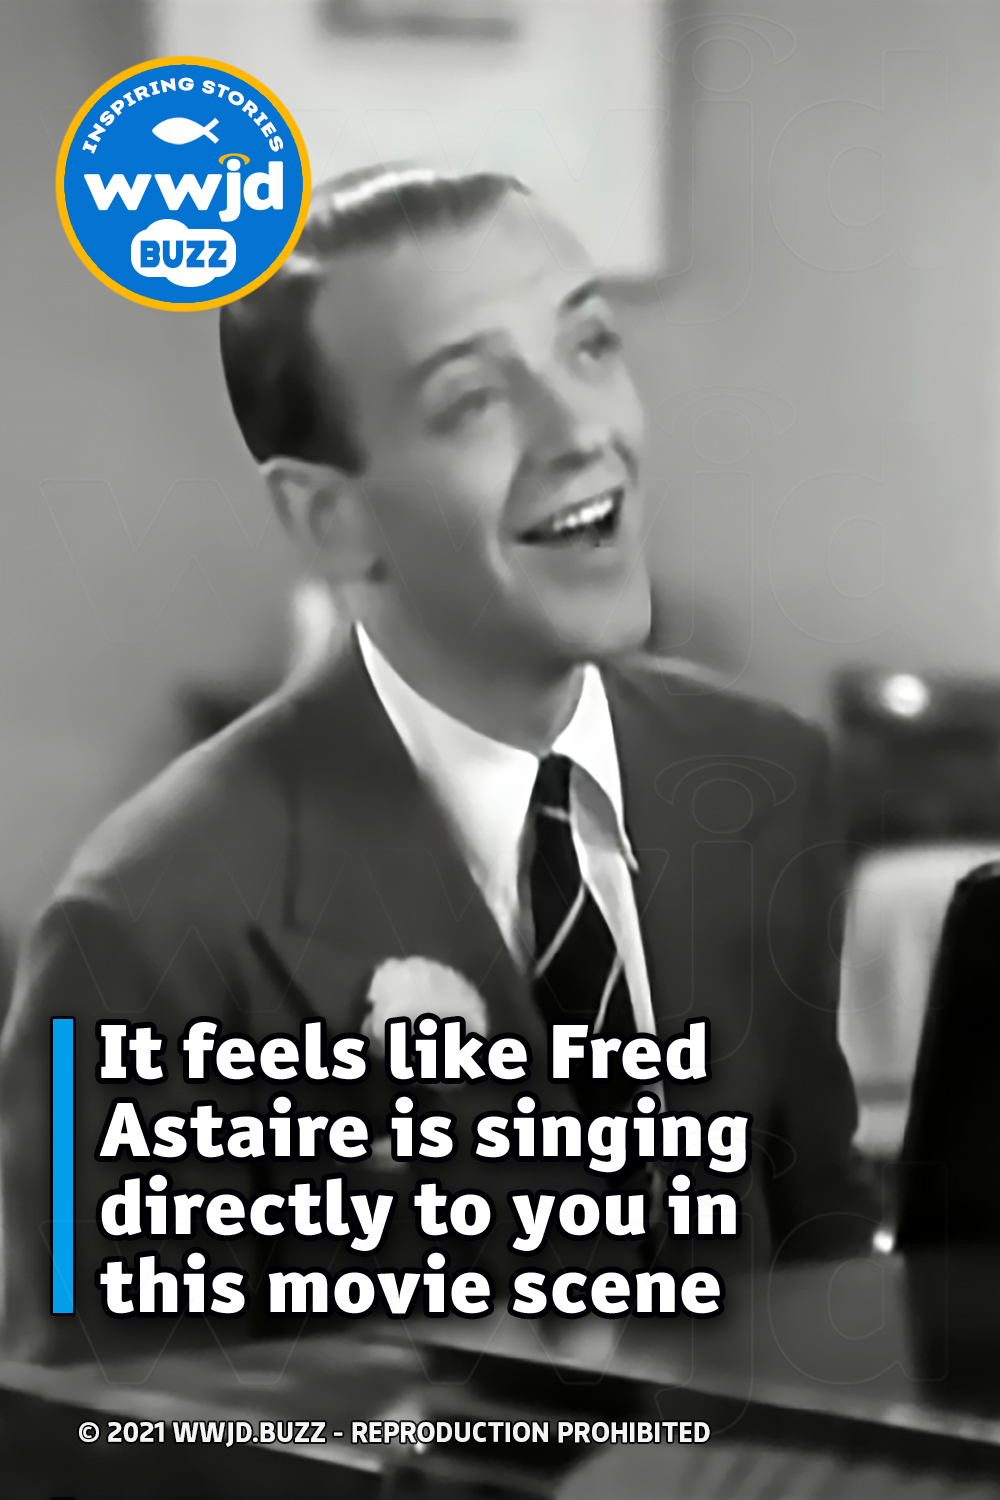 It feels like Fred Astaire is singing directly to you in this movie scene